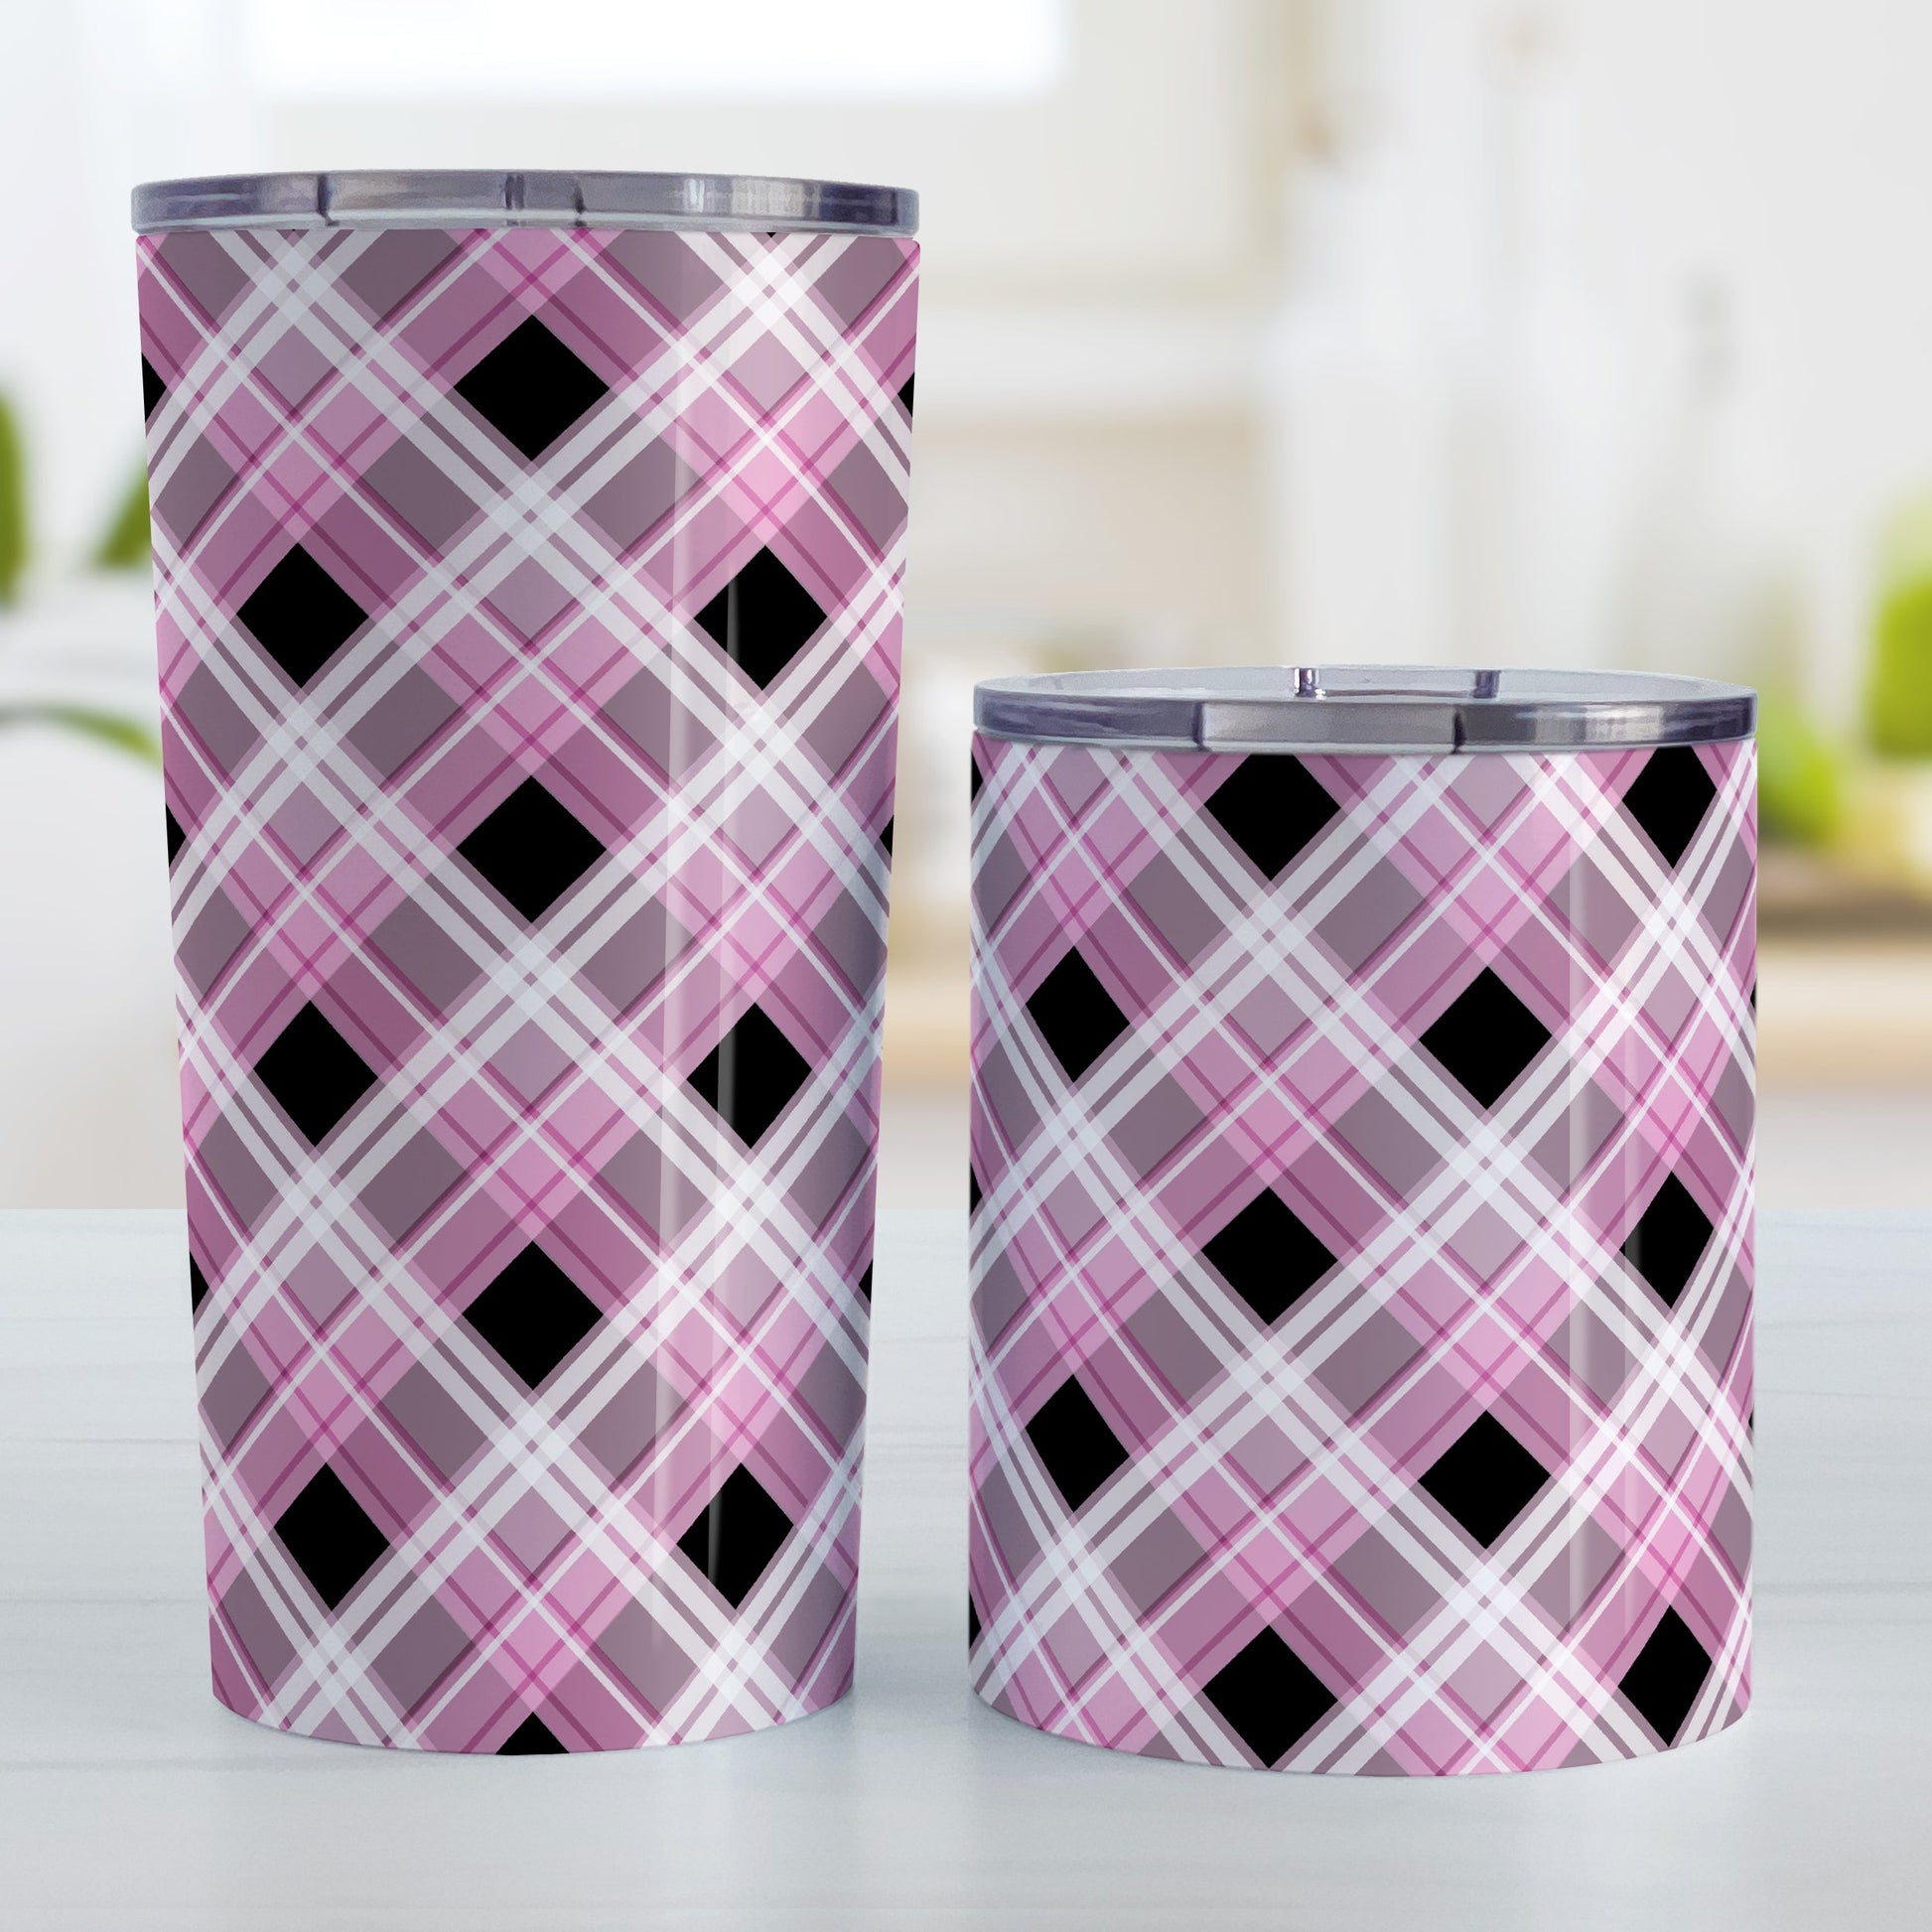 Alternative Black and Pink Plaid Tumbler Cup (20oz and 10oz) at Amy's Coffee Mugs. Stainless steel insulated tumbler cups designed with a diagonal pink, black, and white plaid pattern that wraps around the cups. Tumbler cups designed for someone who loves plaid patterns and the colors pink and black together. Photo shows both sized cups next to each other.